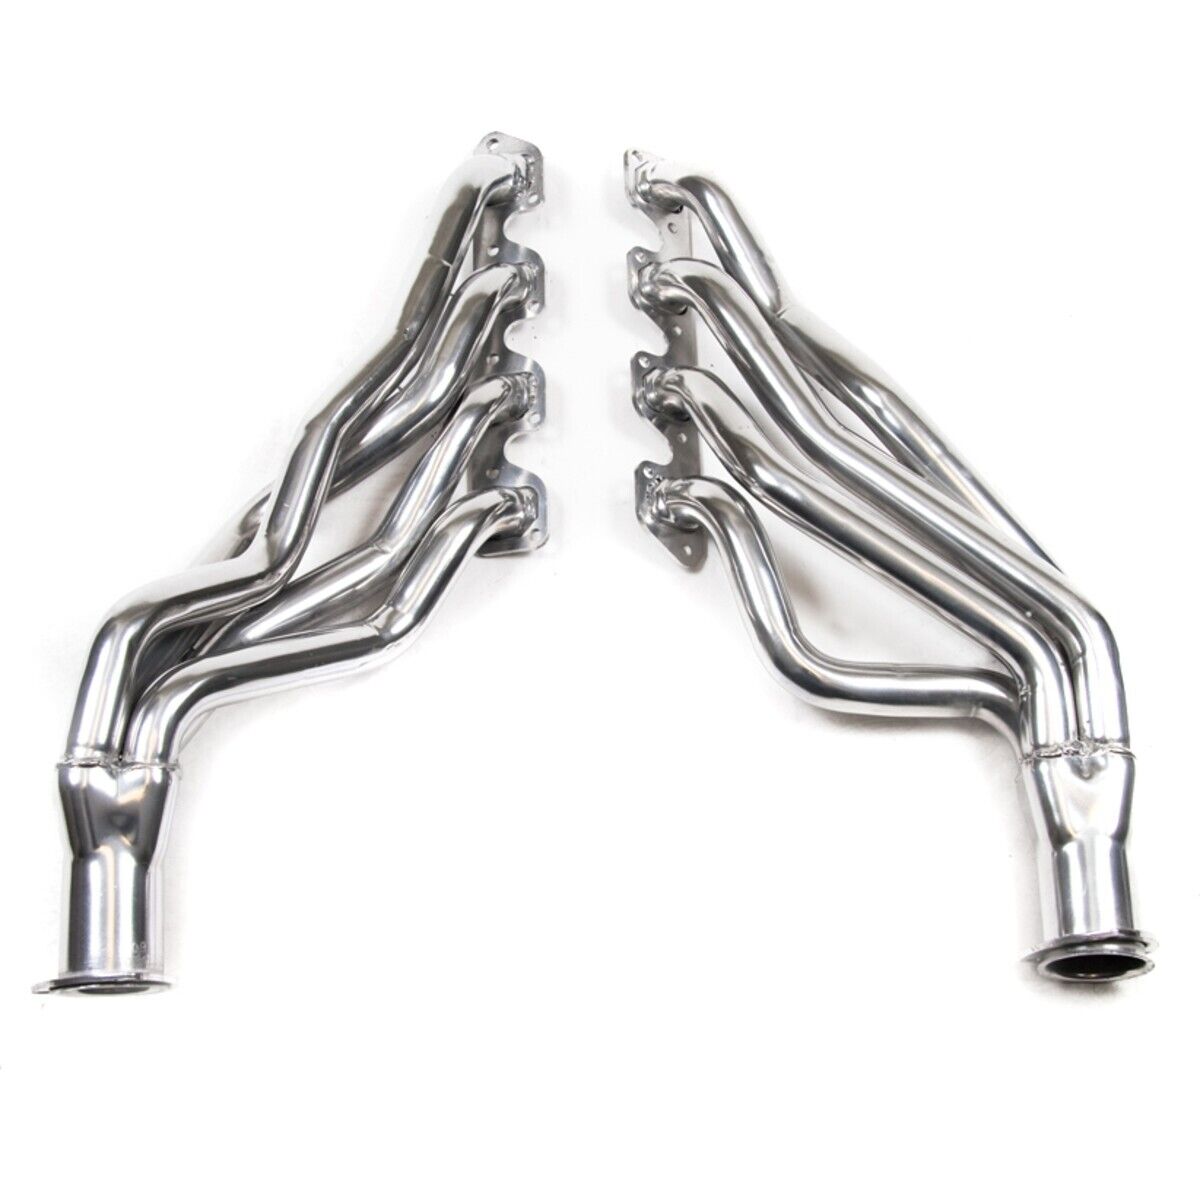 32118FLT Flowtech Set of 2 Headers for Ford Mustang Mercury Cougar Montego Pair